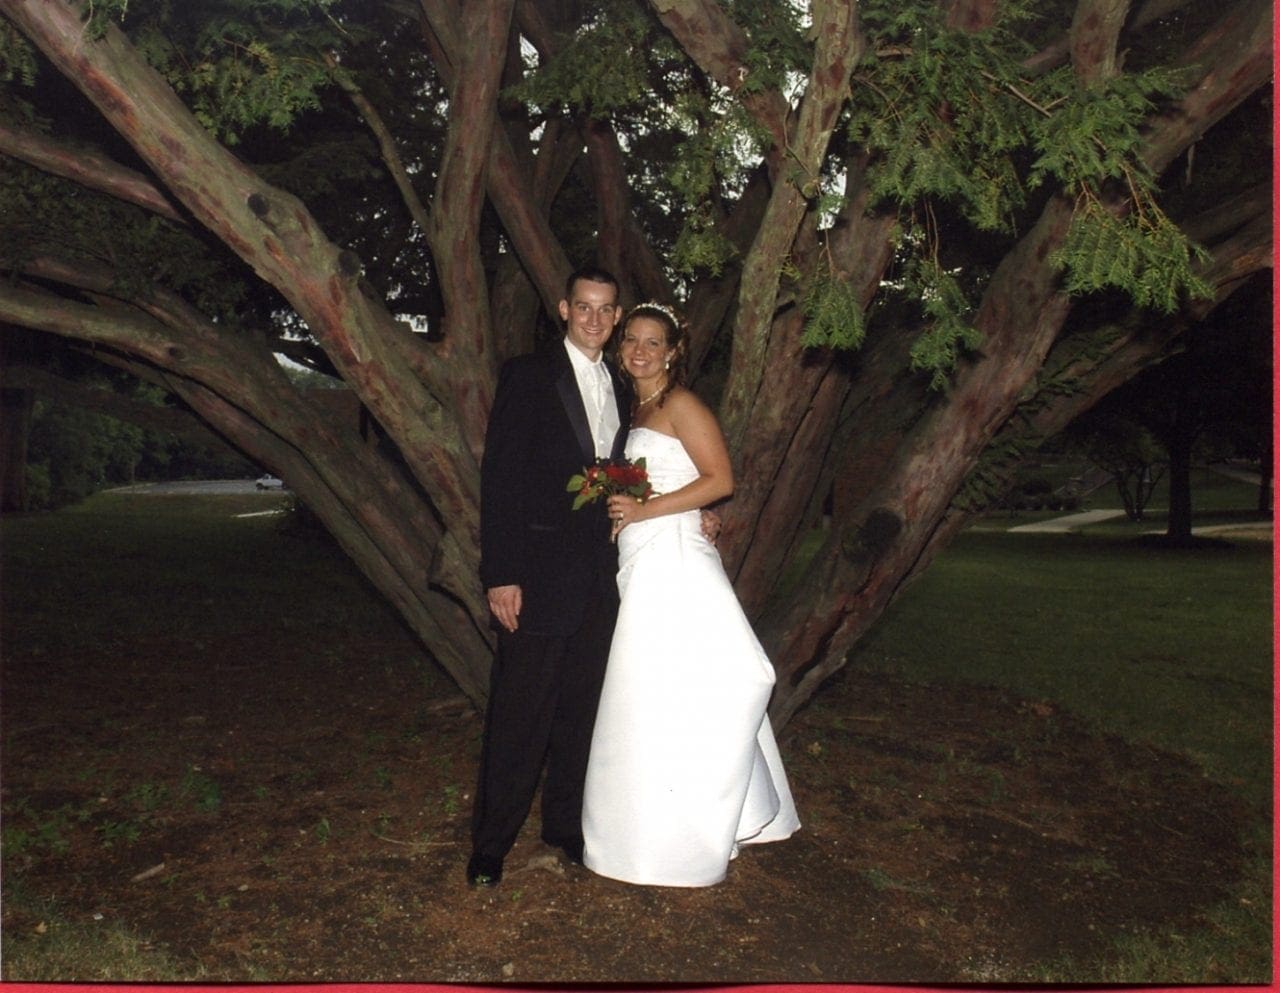 Our wedding photo in front of a unique tree